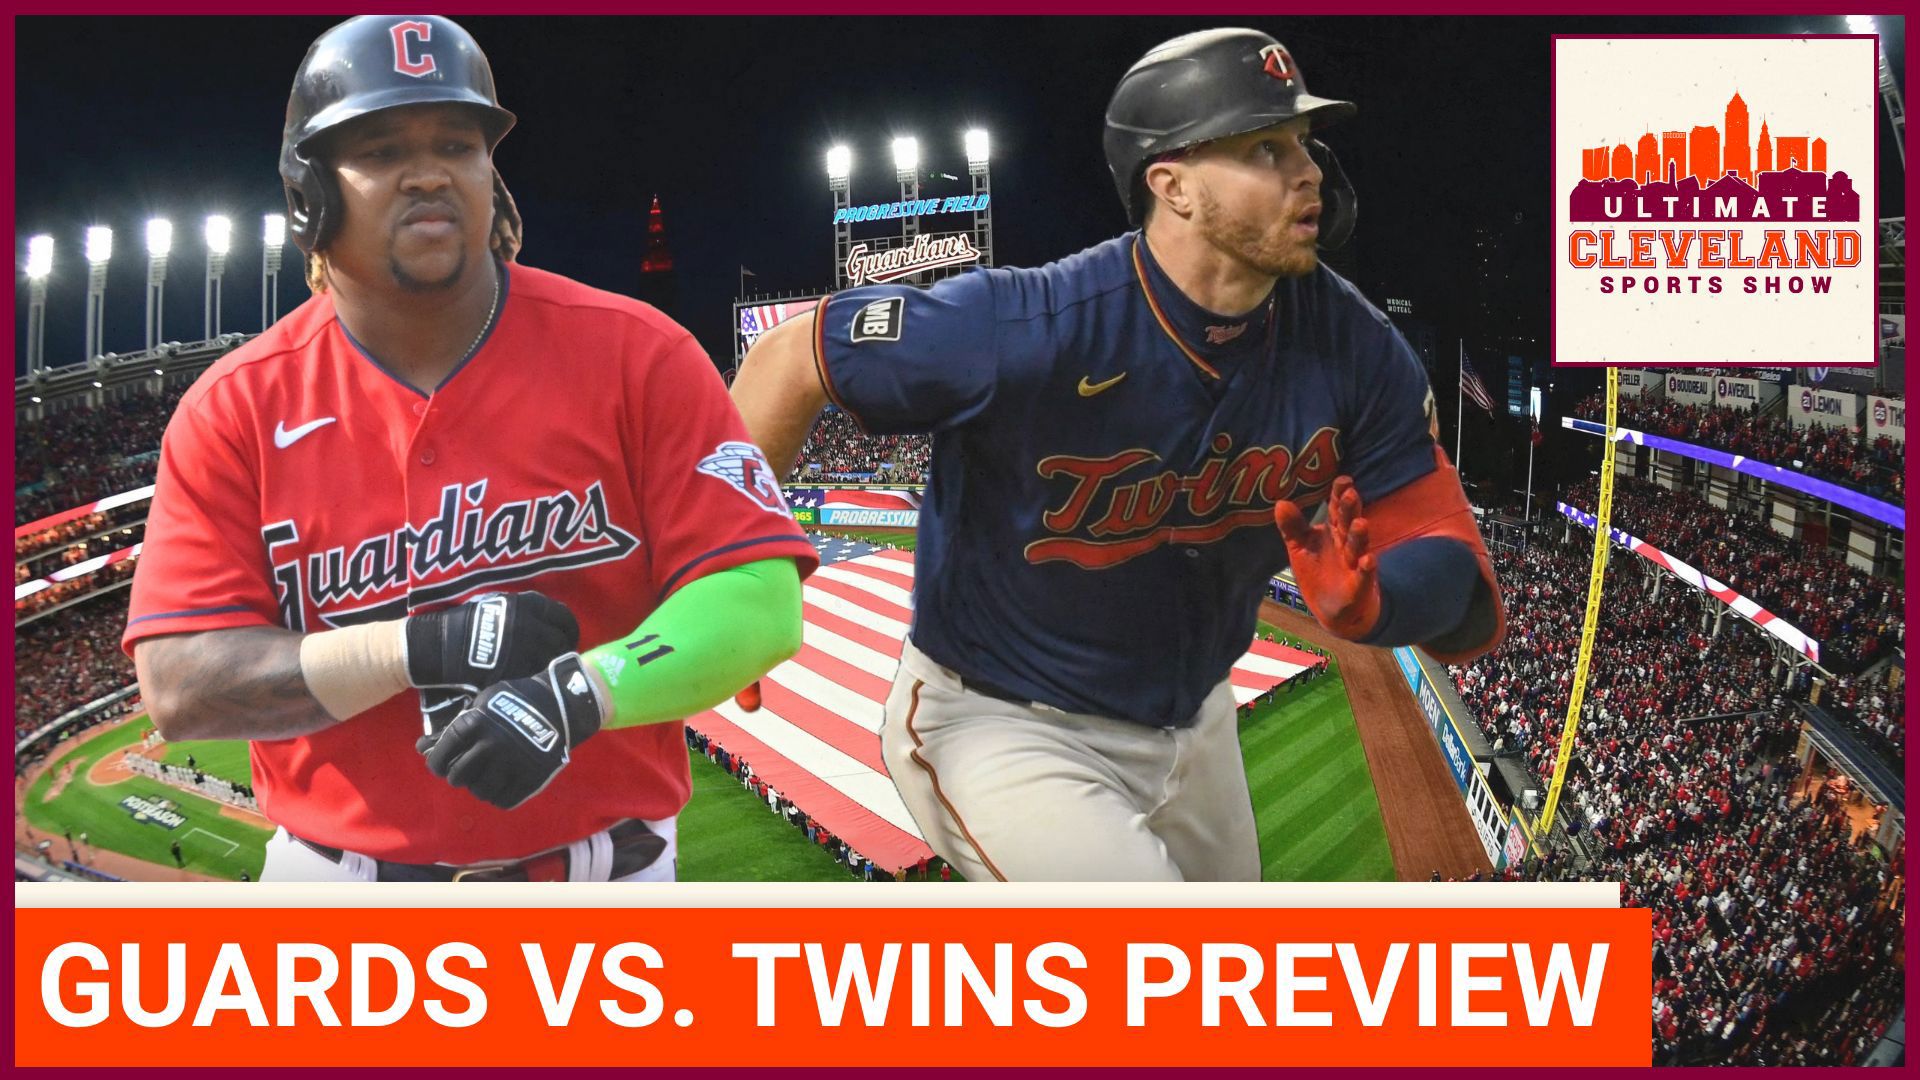 Heidi Watney of Apple TV+ previews the AL Central battle between the Cleveland Guardians and Minnesota Twins.